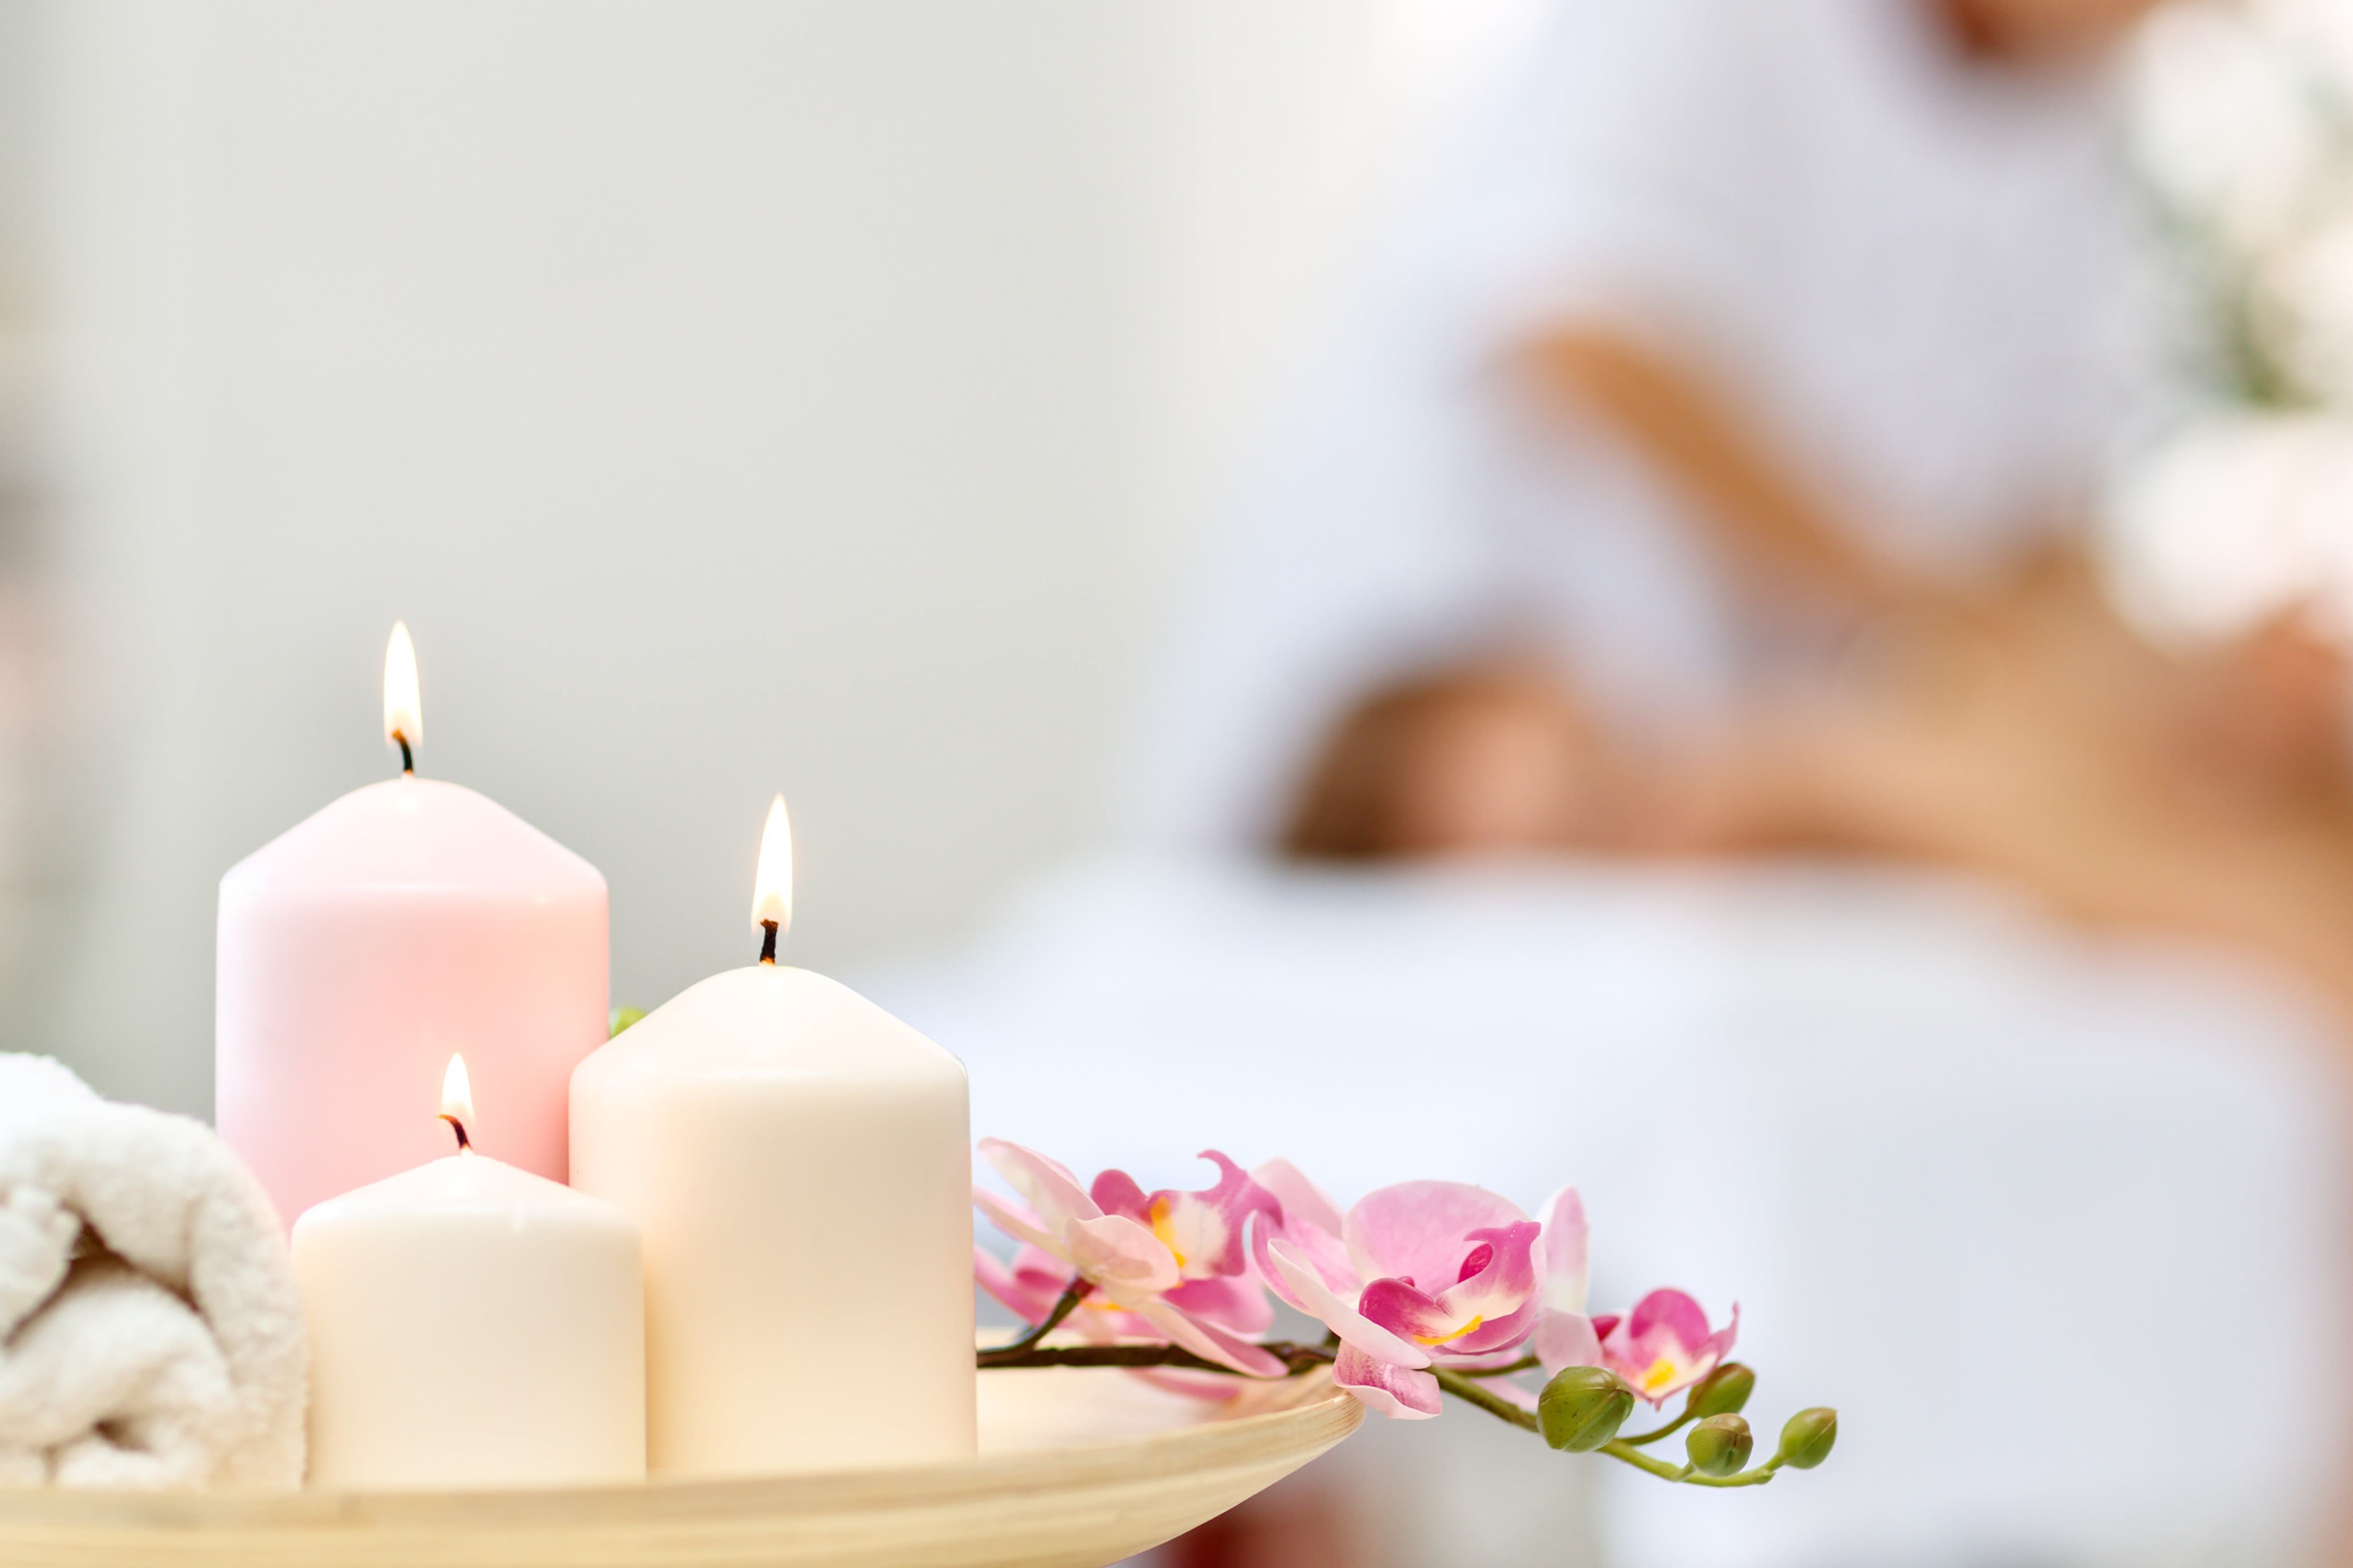 Serenity Sheer Massage Read Reviews And Book Classes On Classpass